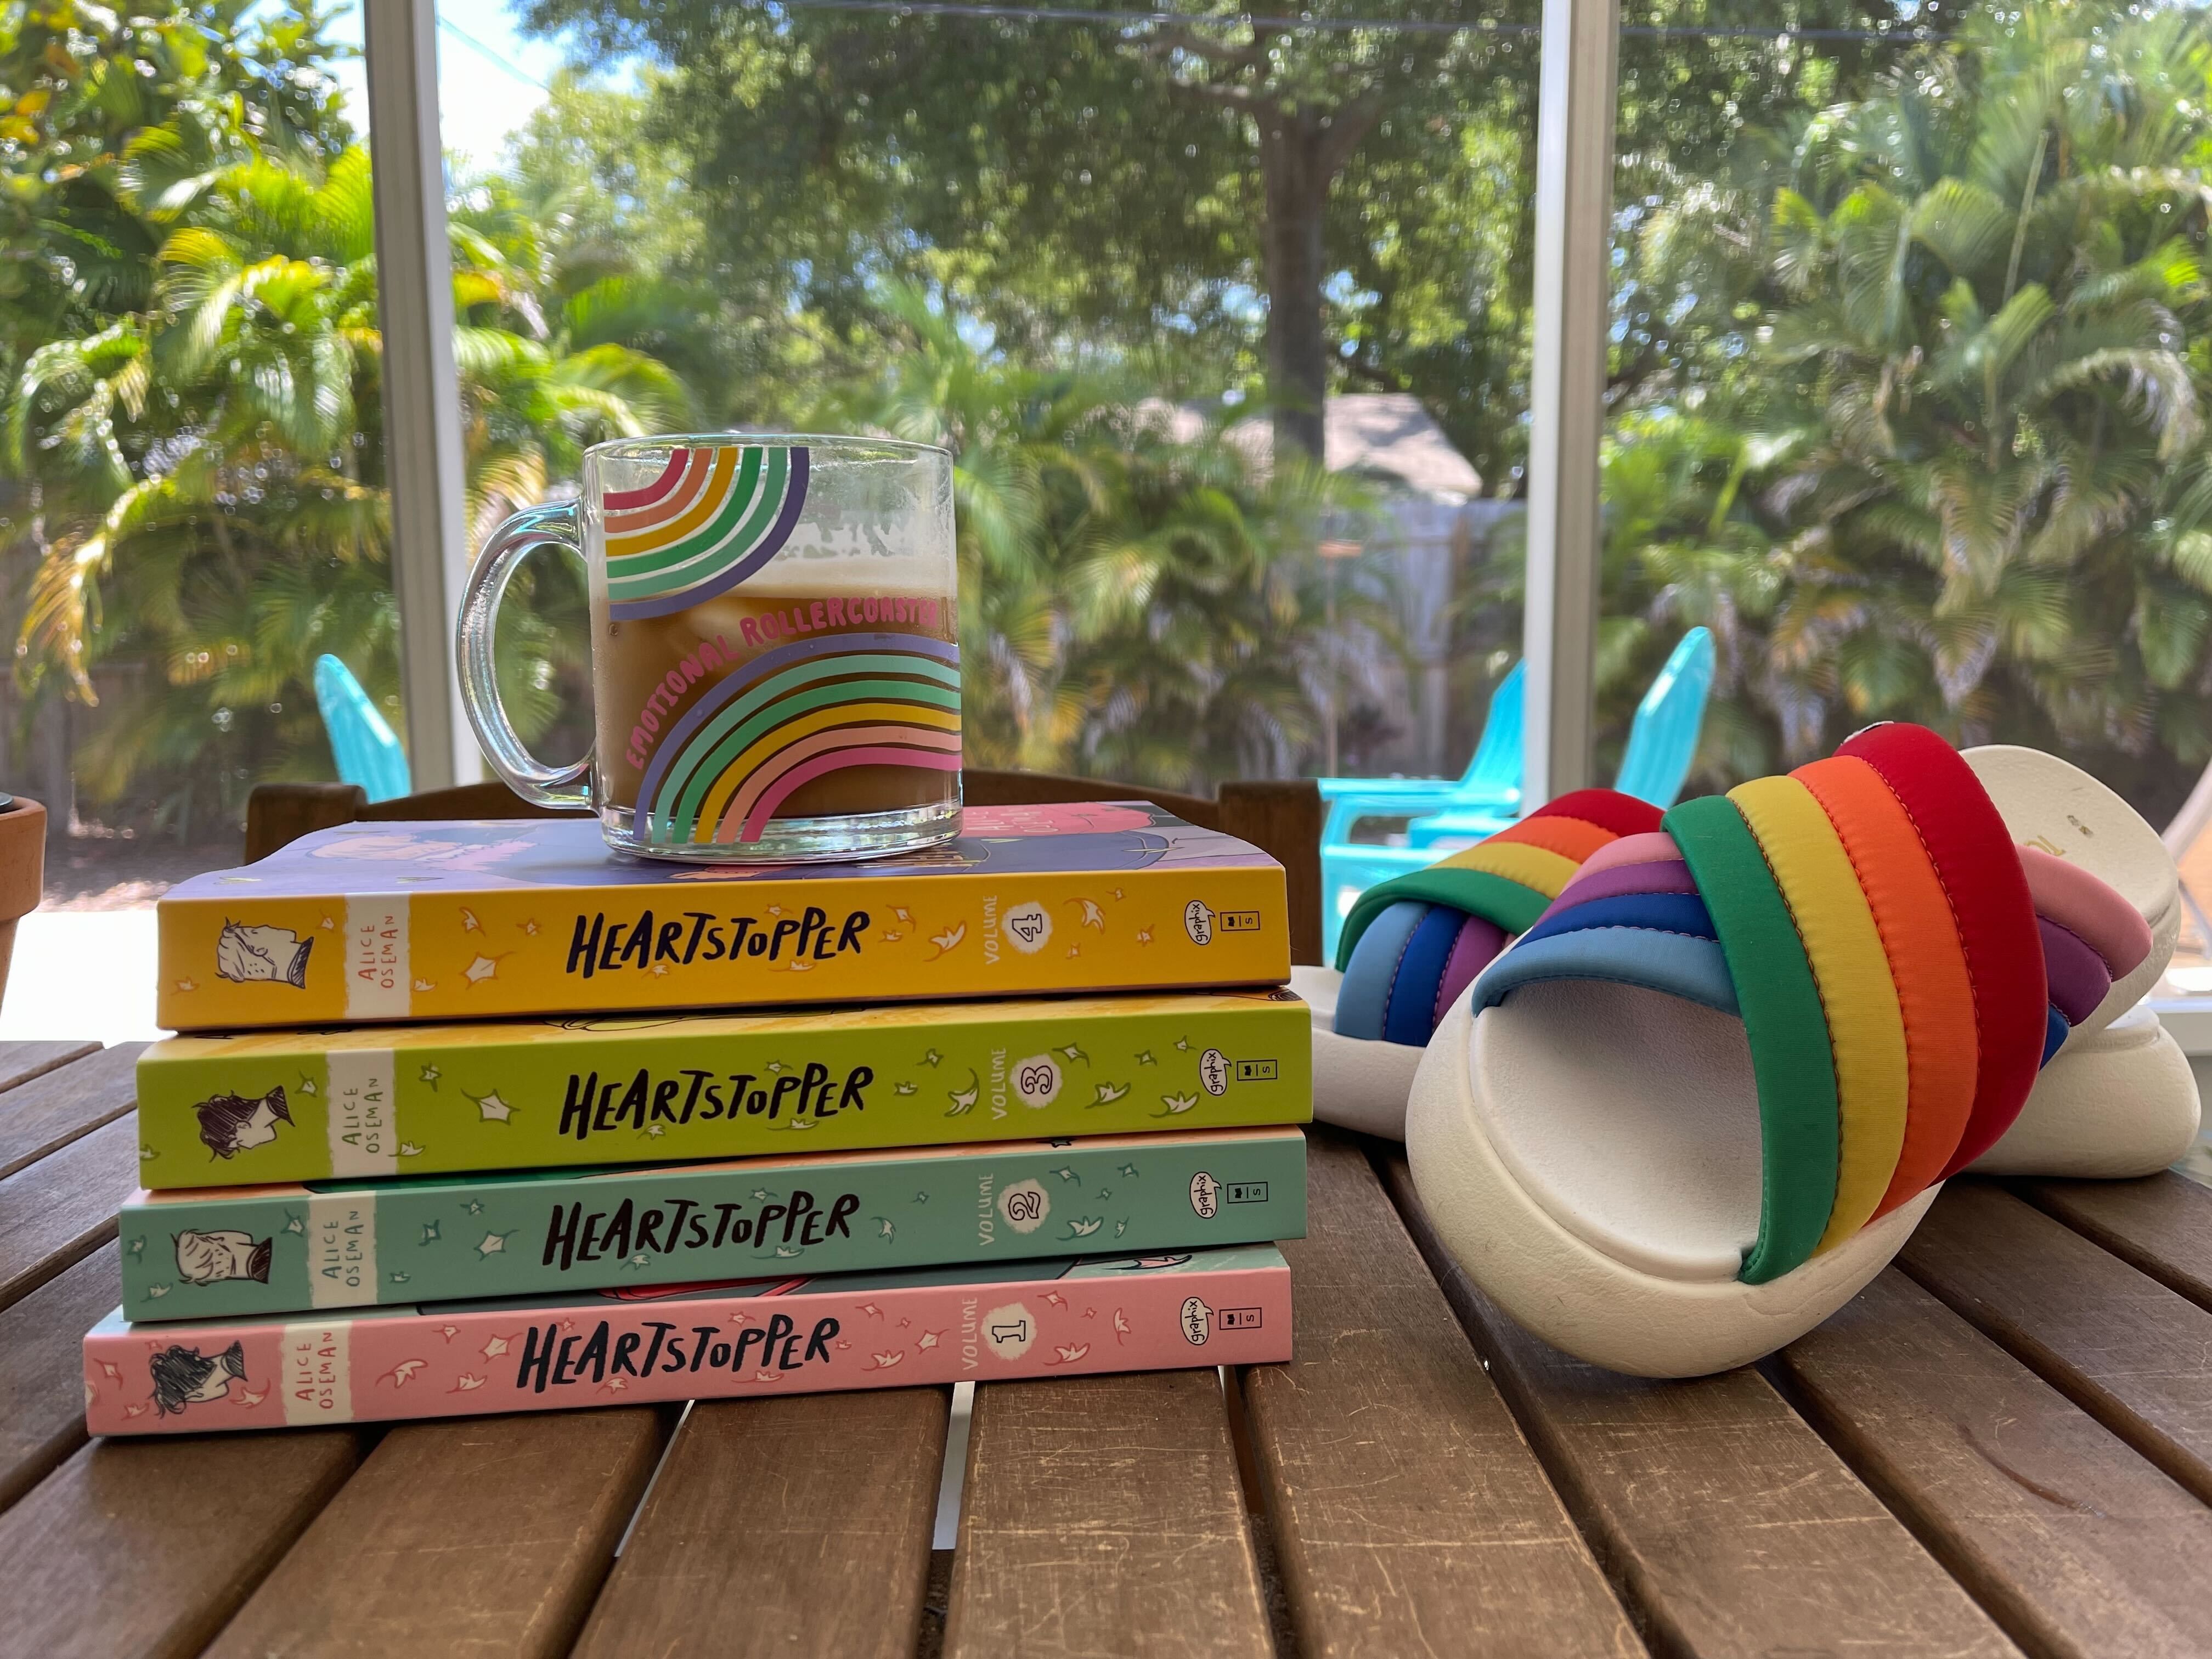 the Heartstopper books and toms mallow pride shoes